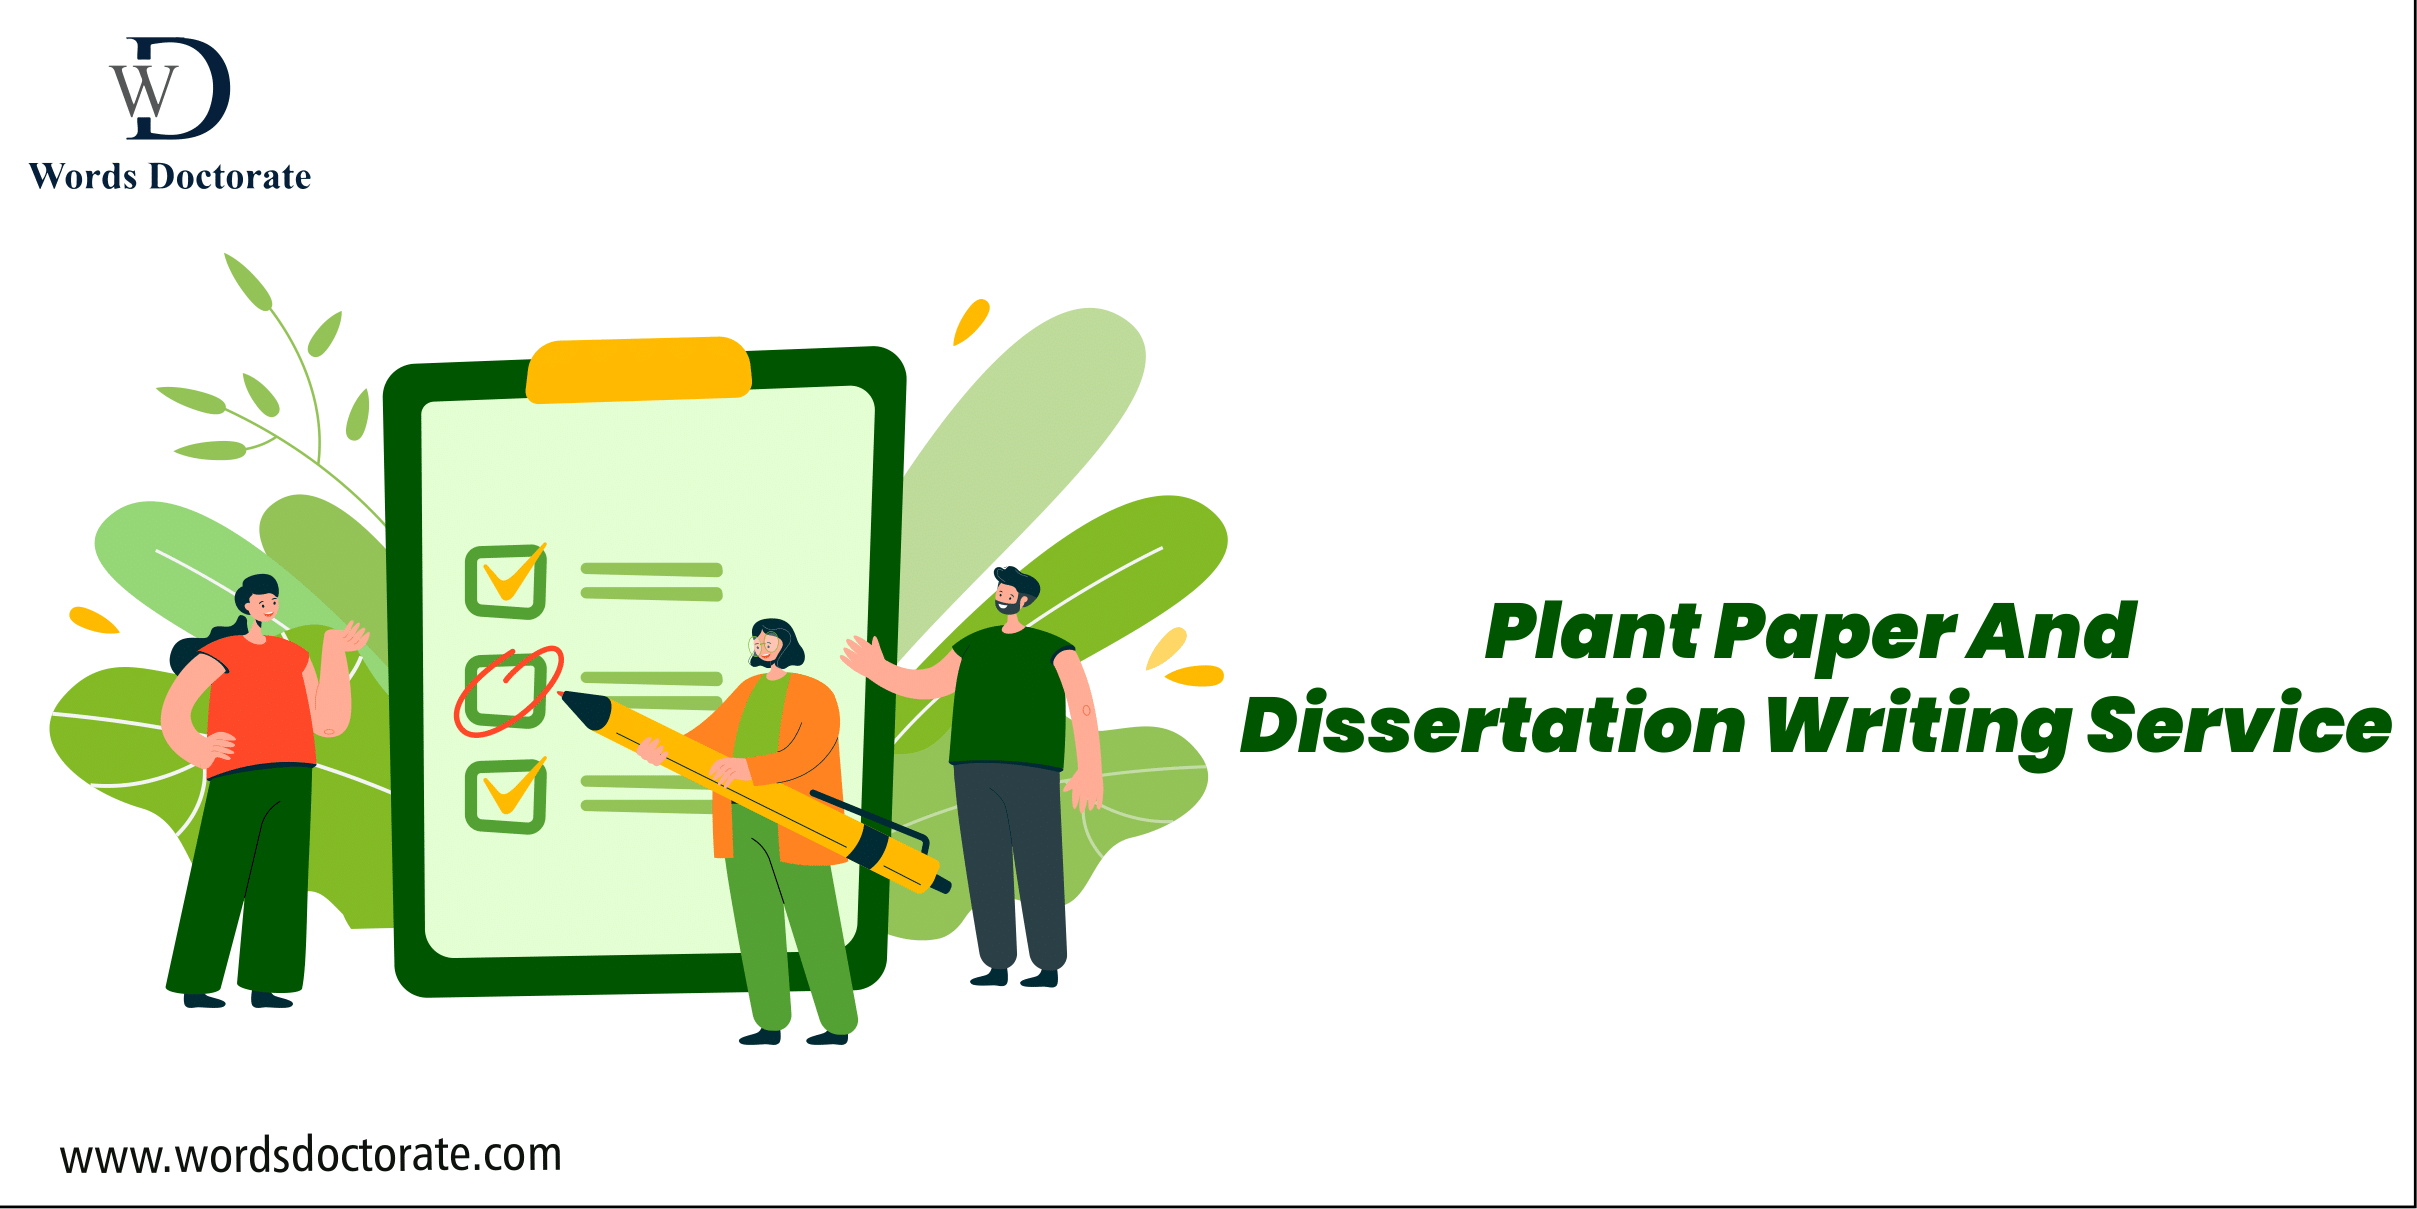 Plant Paper And Dissertation Writing Service